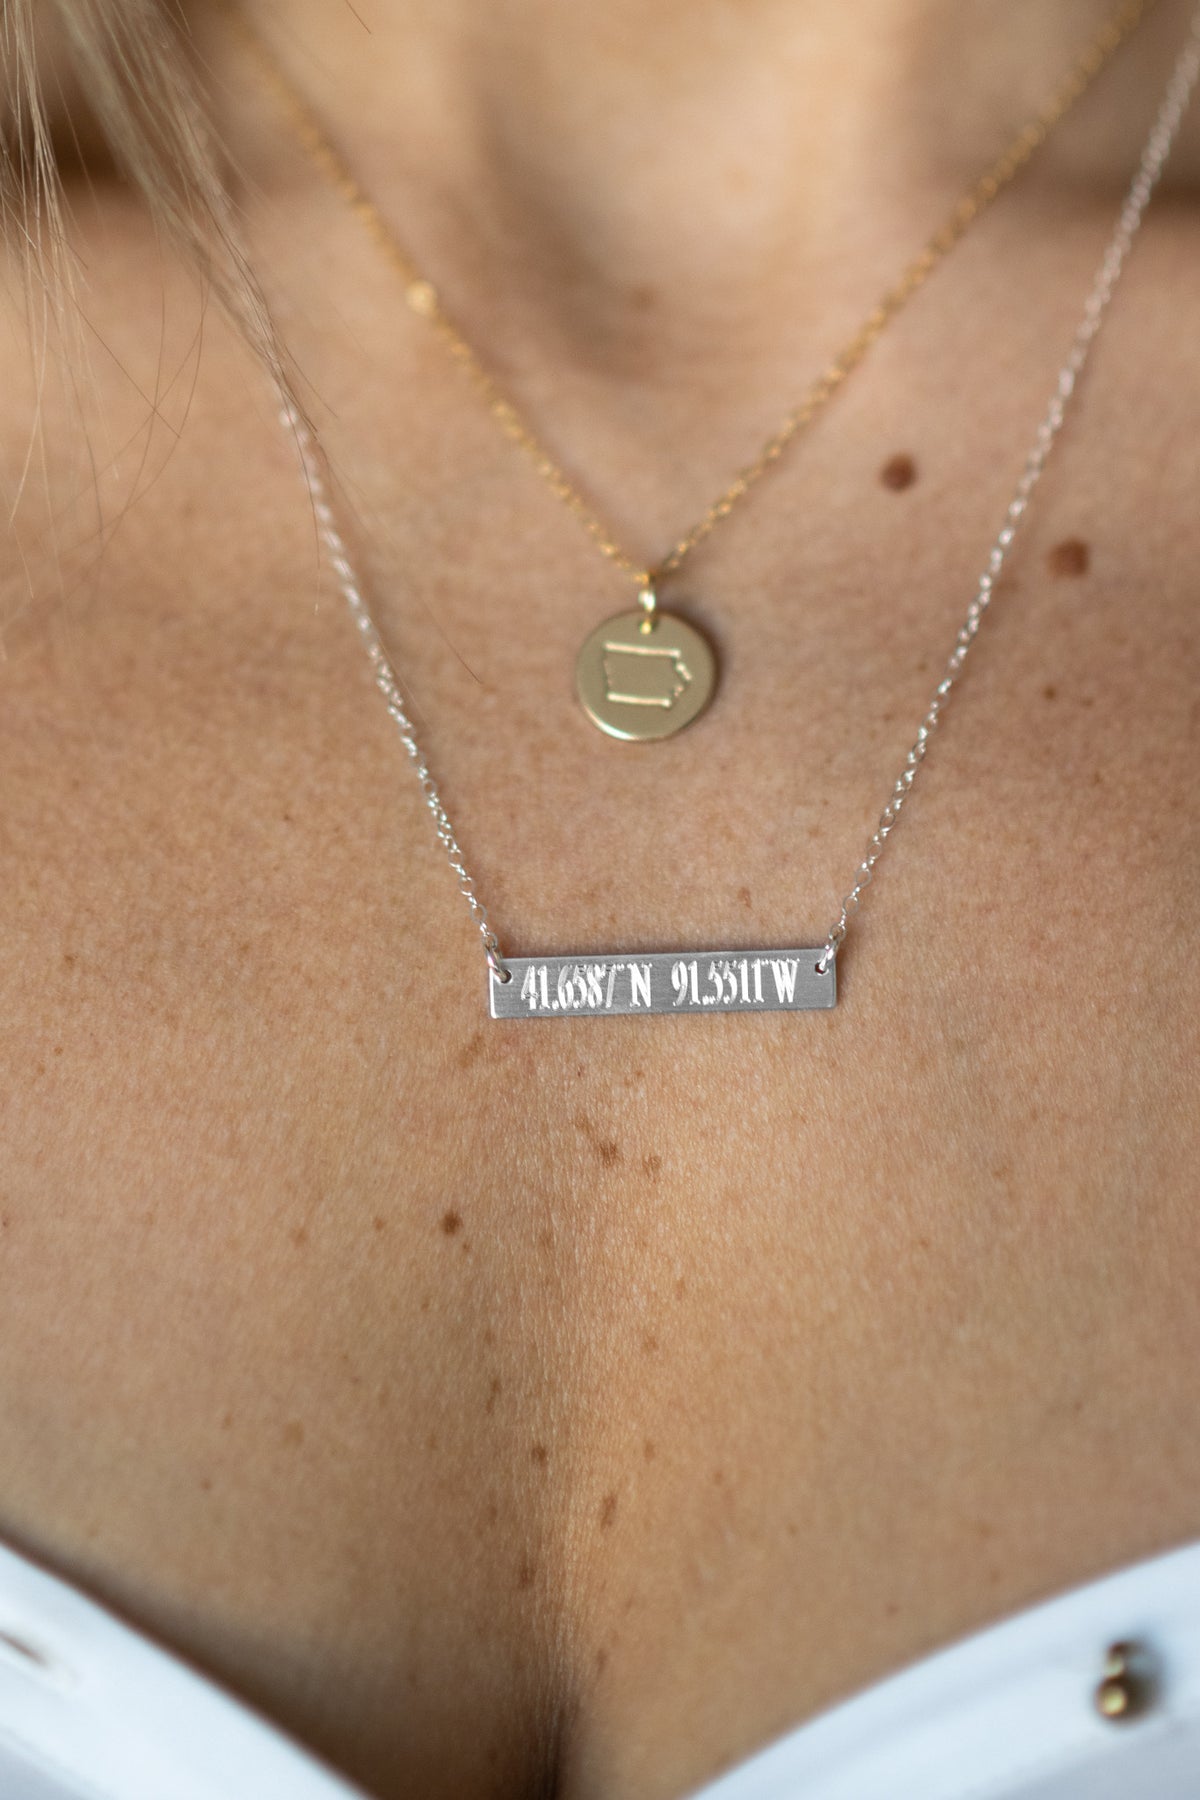 The Stefanie Coordinates Necklace Inspired by Laura VandeBerg